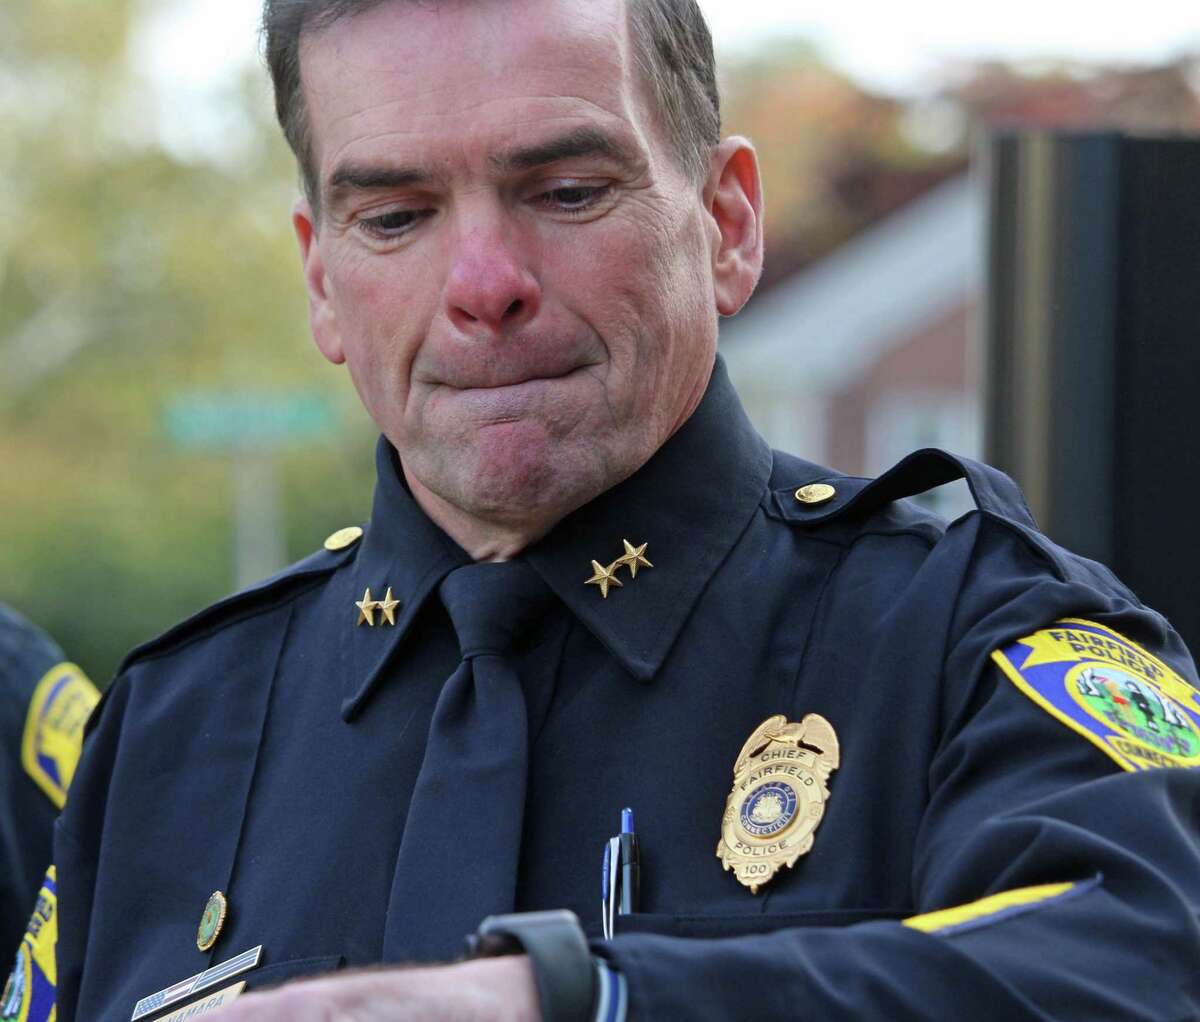 Outgoing Police Chief Gary MacNamara checks his watch as his last day on the job winds down on Oct. 26.